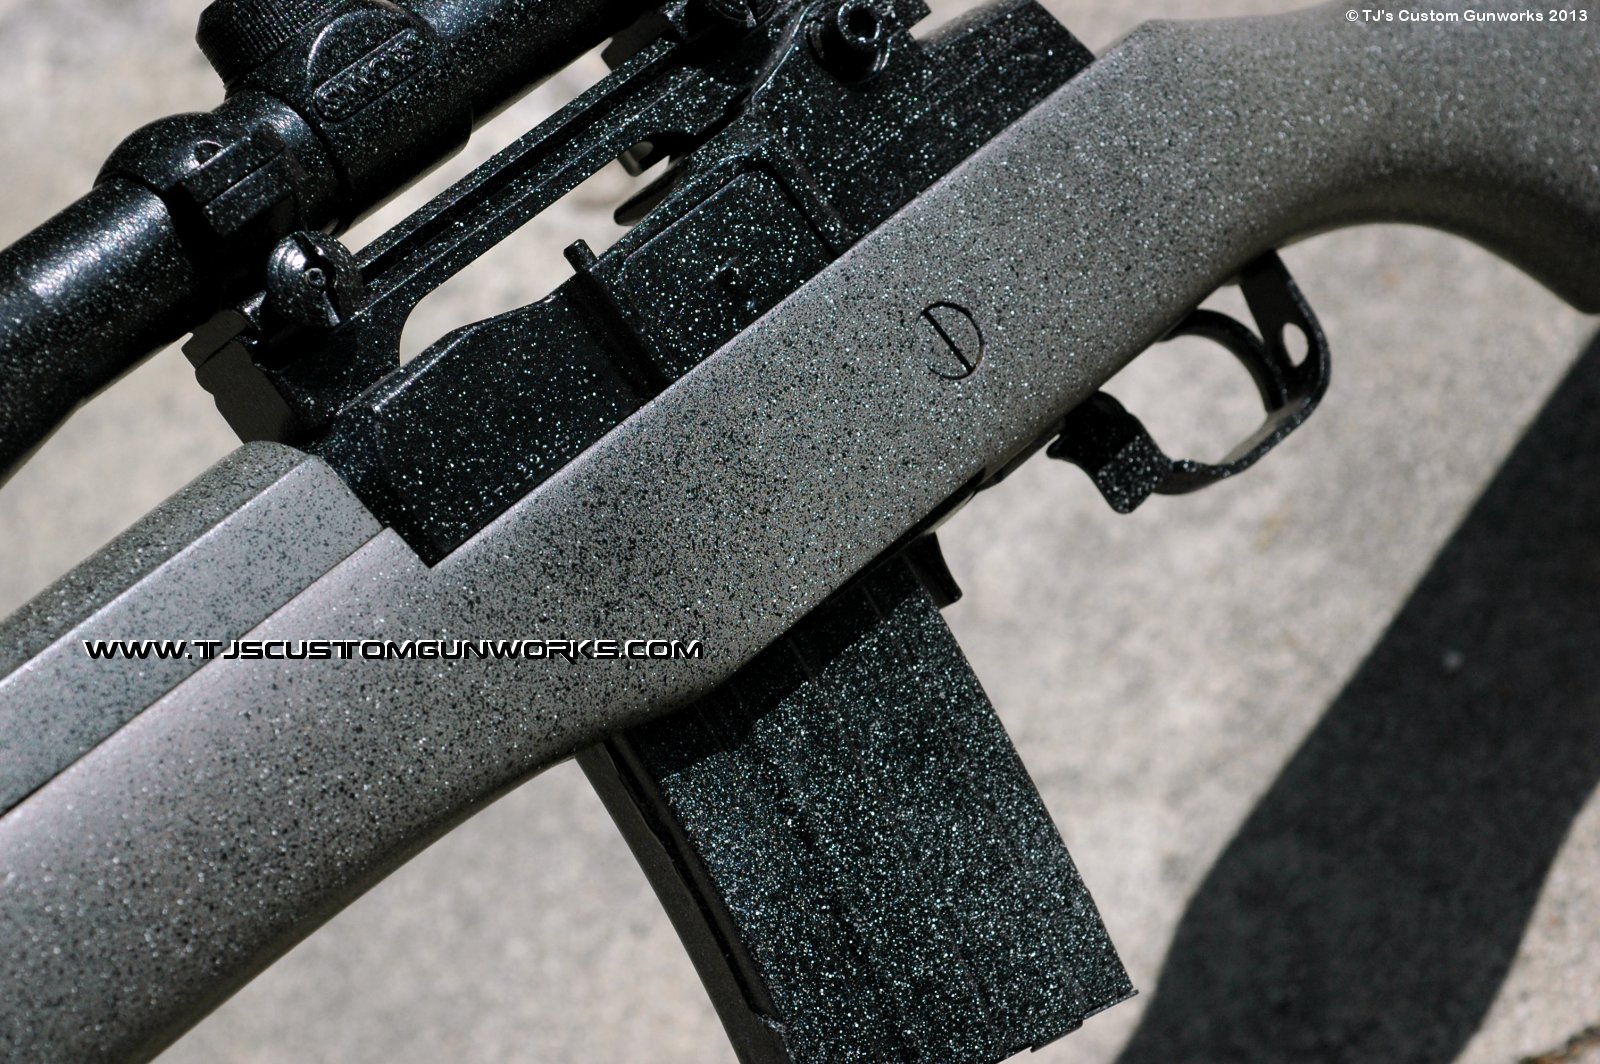 Custom Ruger Mini-14 .223 With Urban Granite Speckled Duracoat